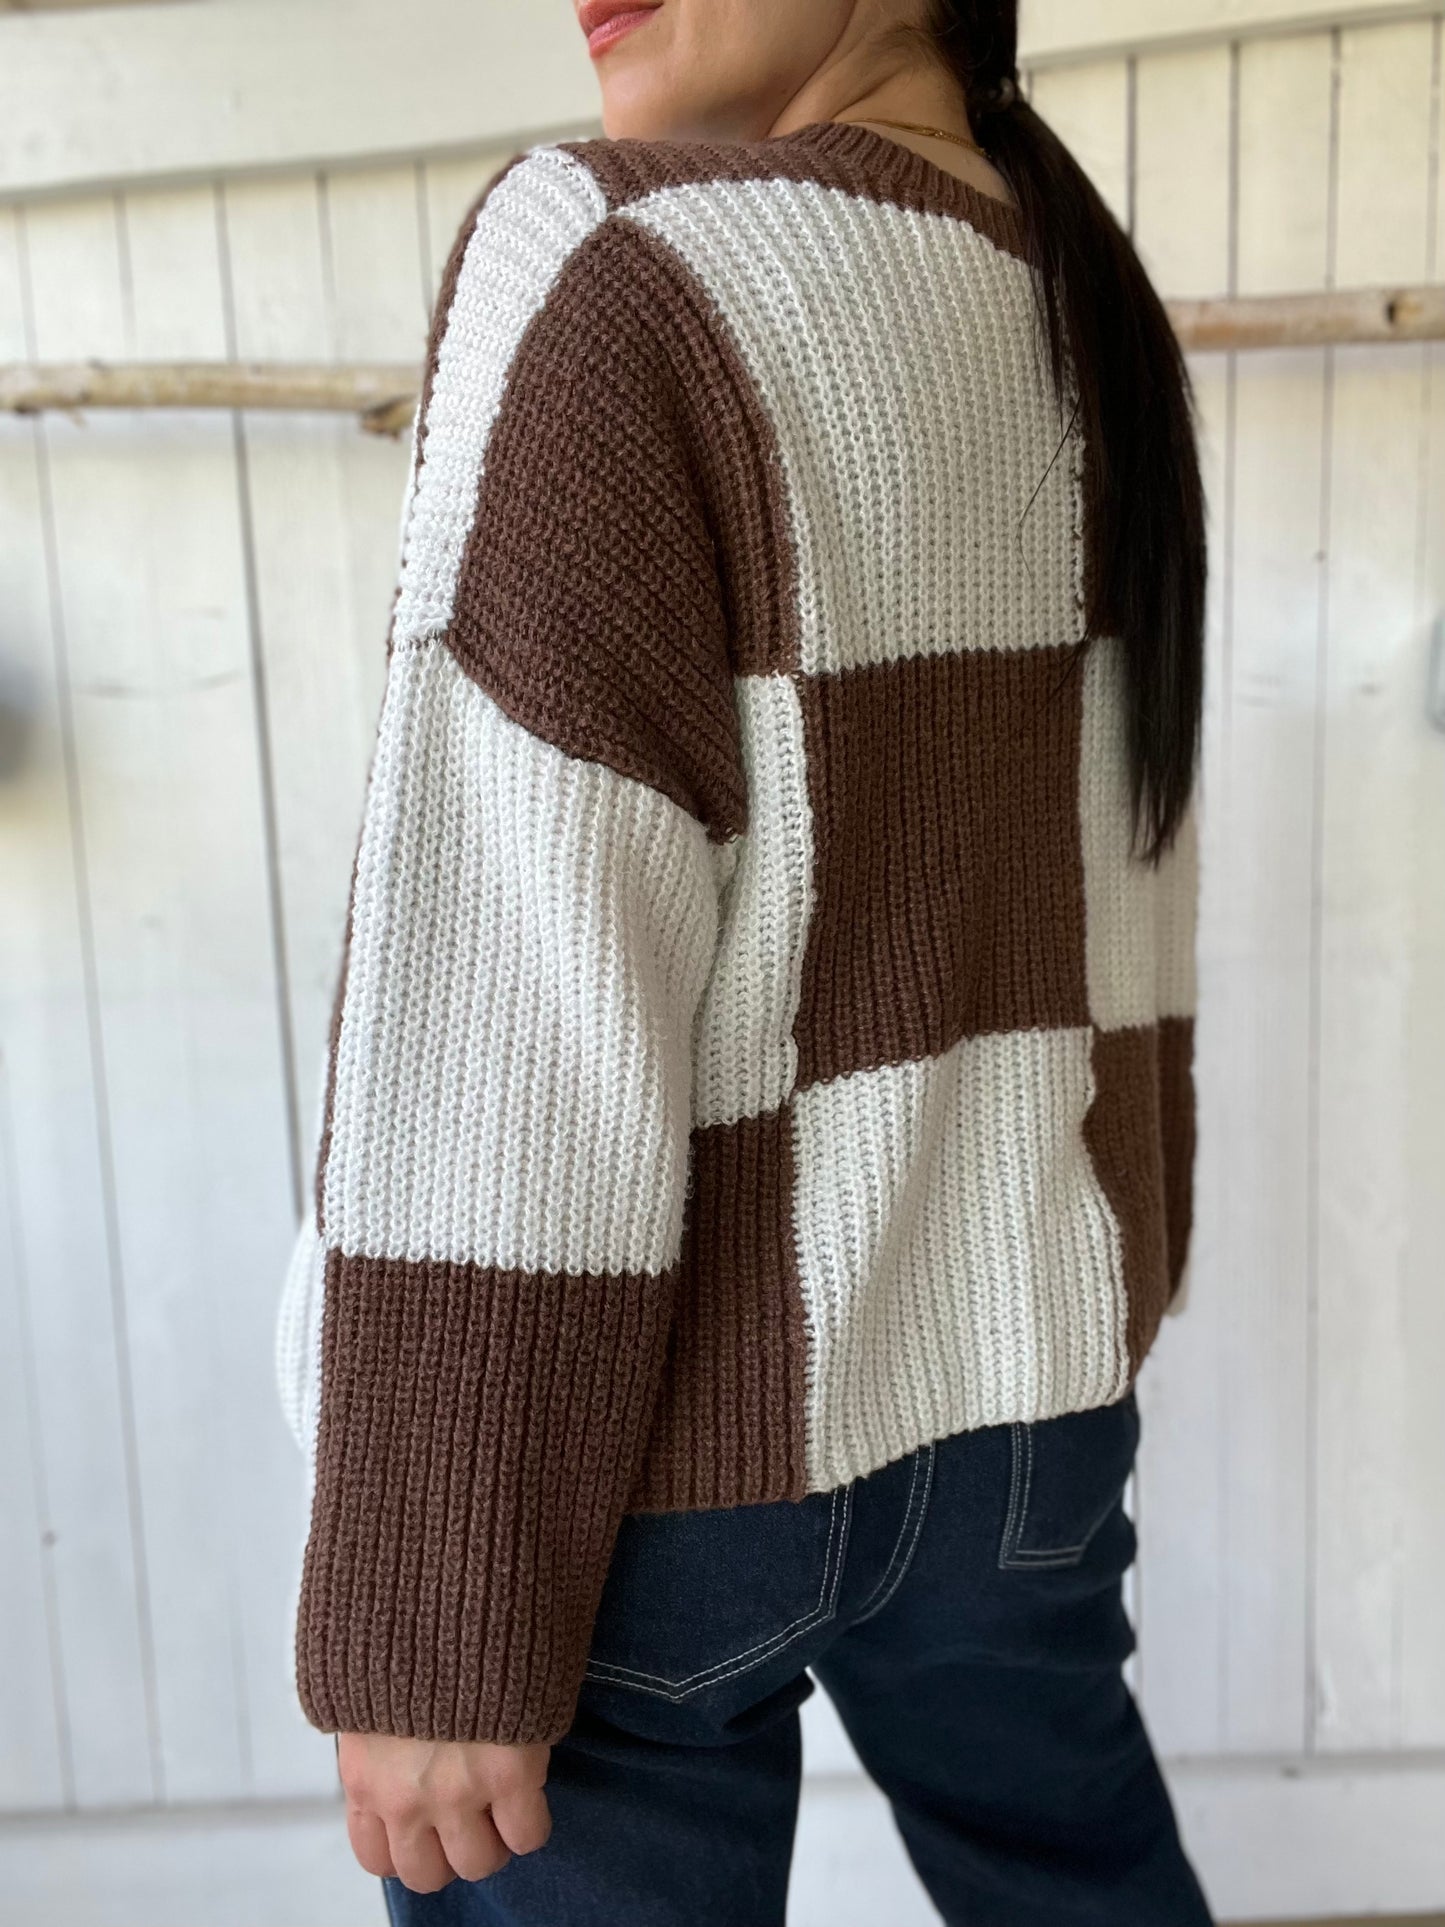 Oversize Block Brown & White Sweater - Size L